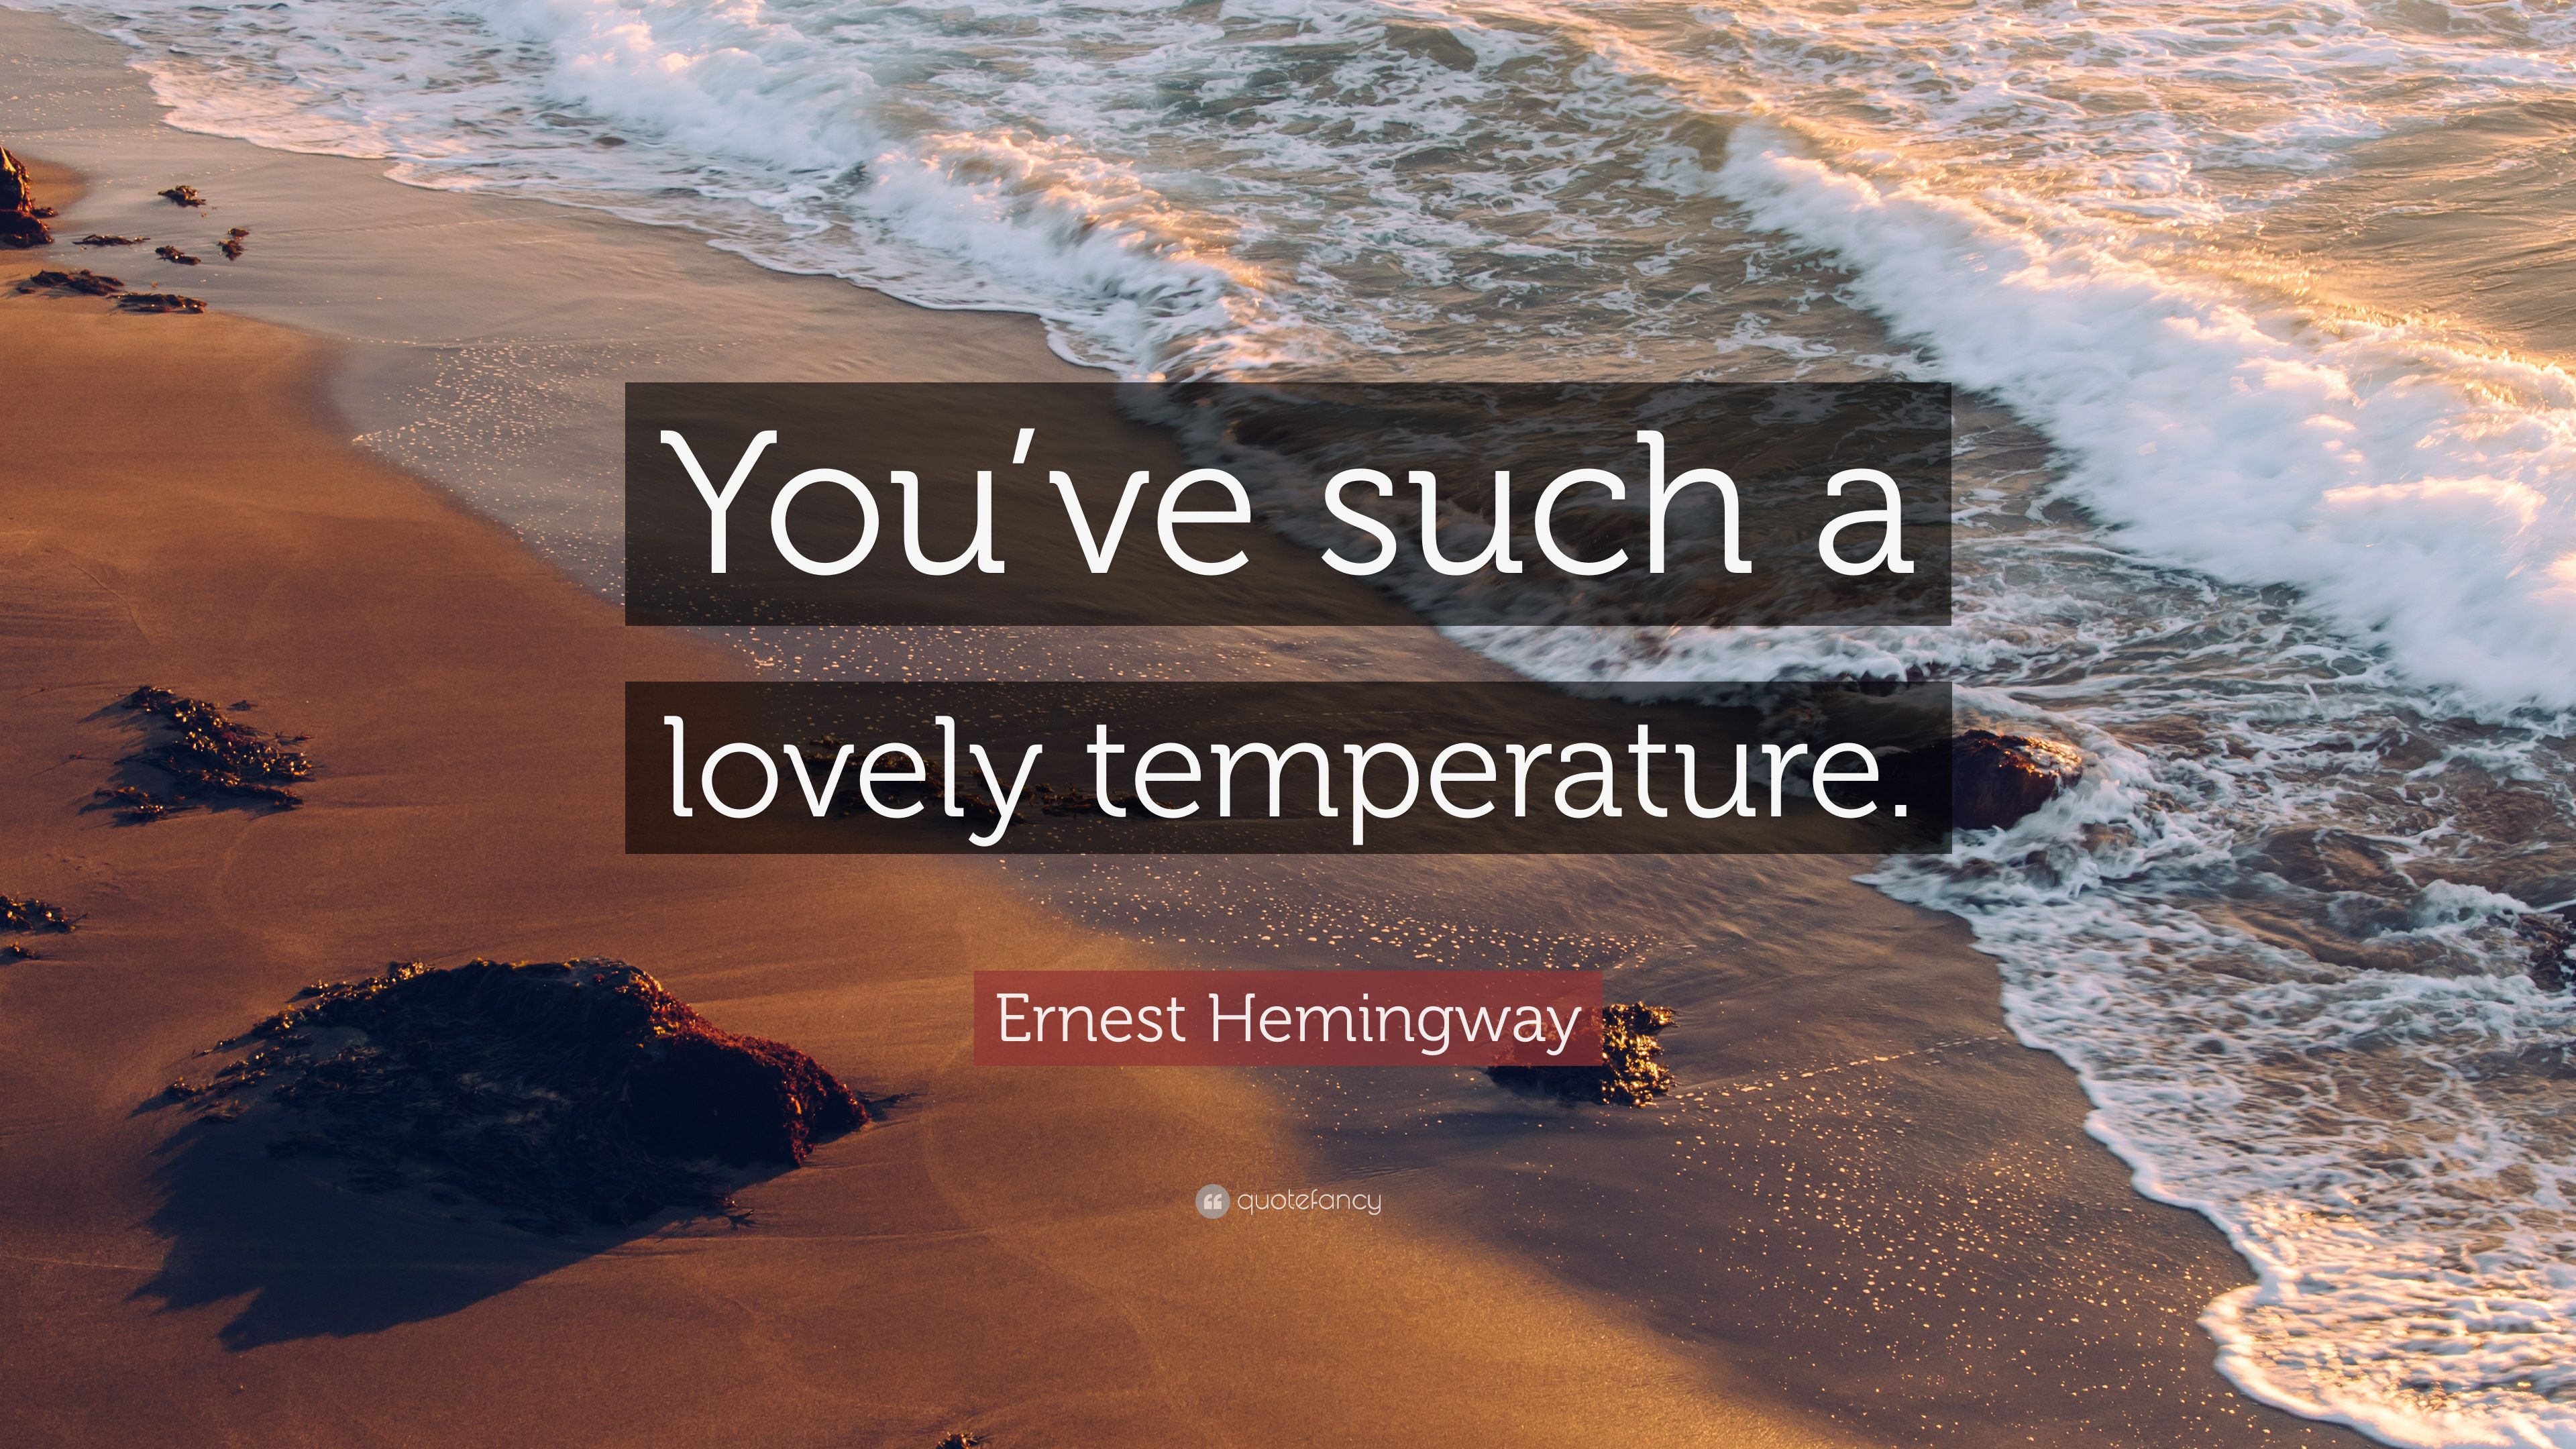 Ernest Hemingway Quote: “You've such a lovely temperature.” 7